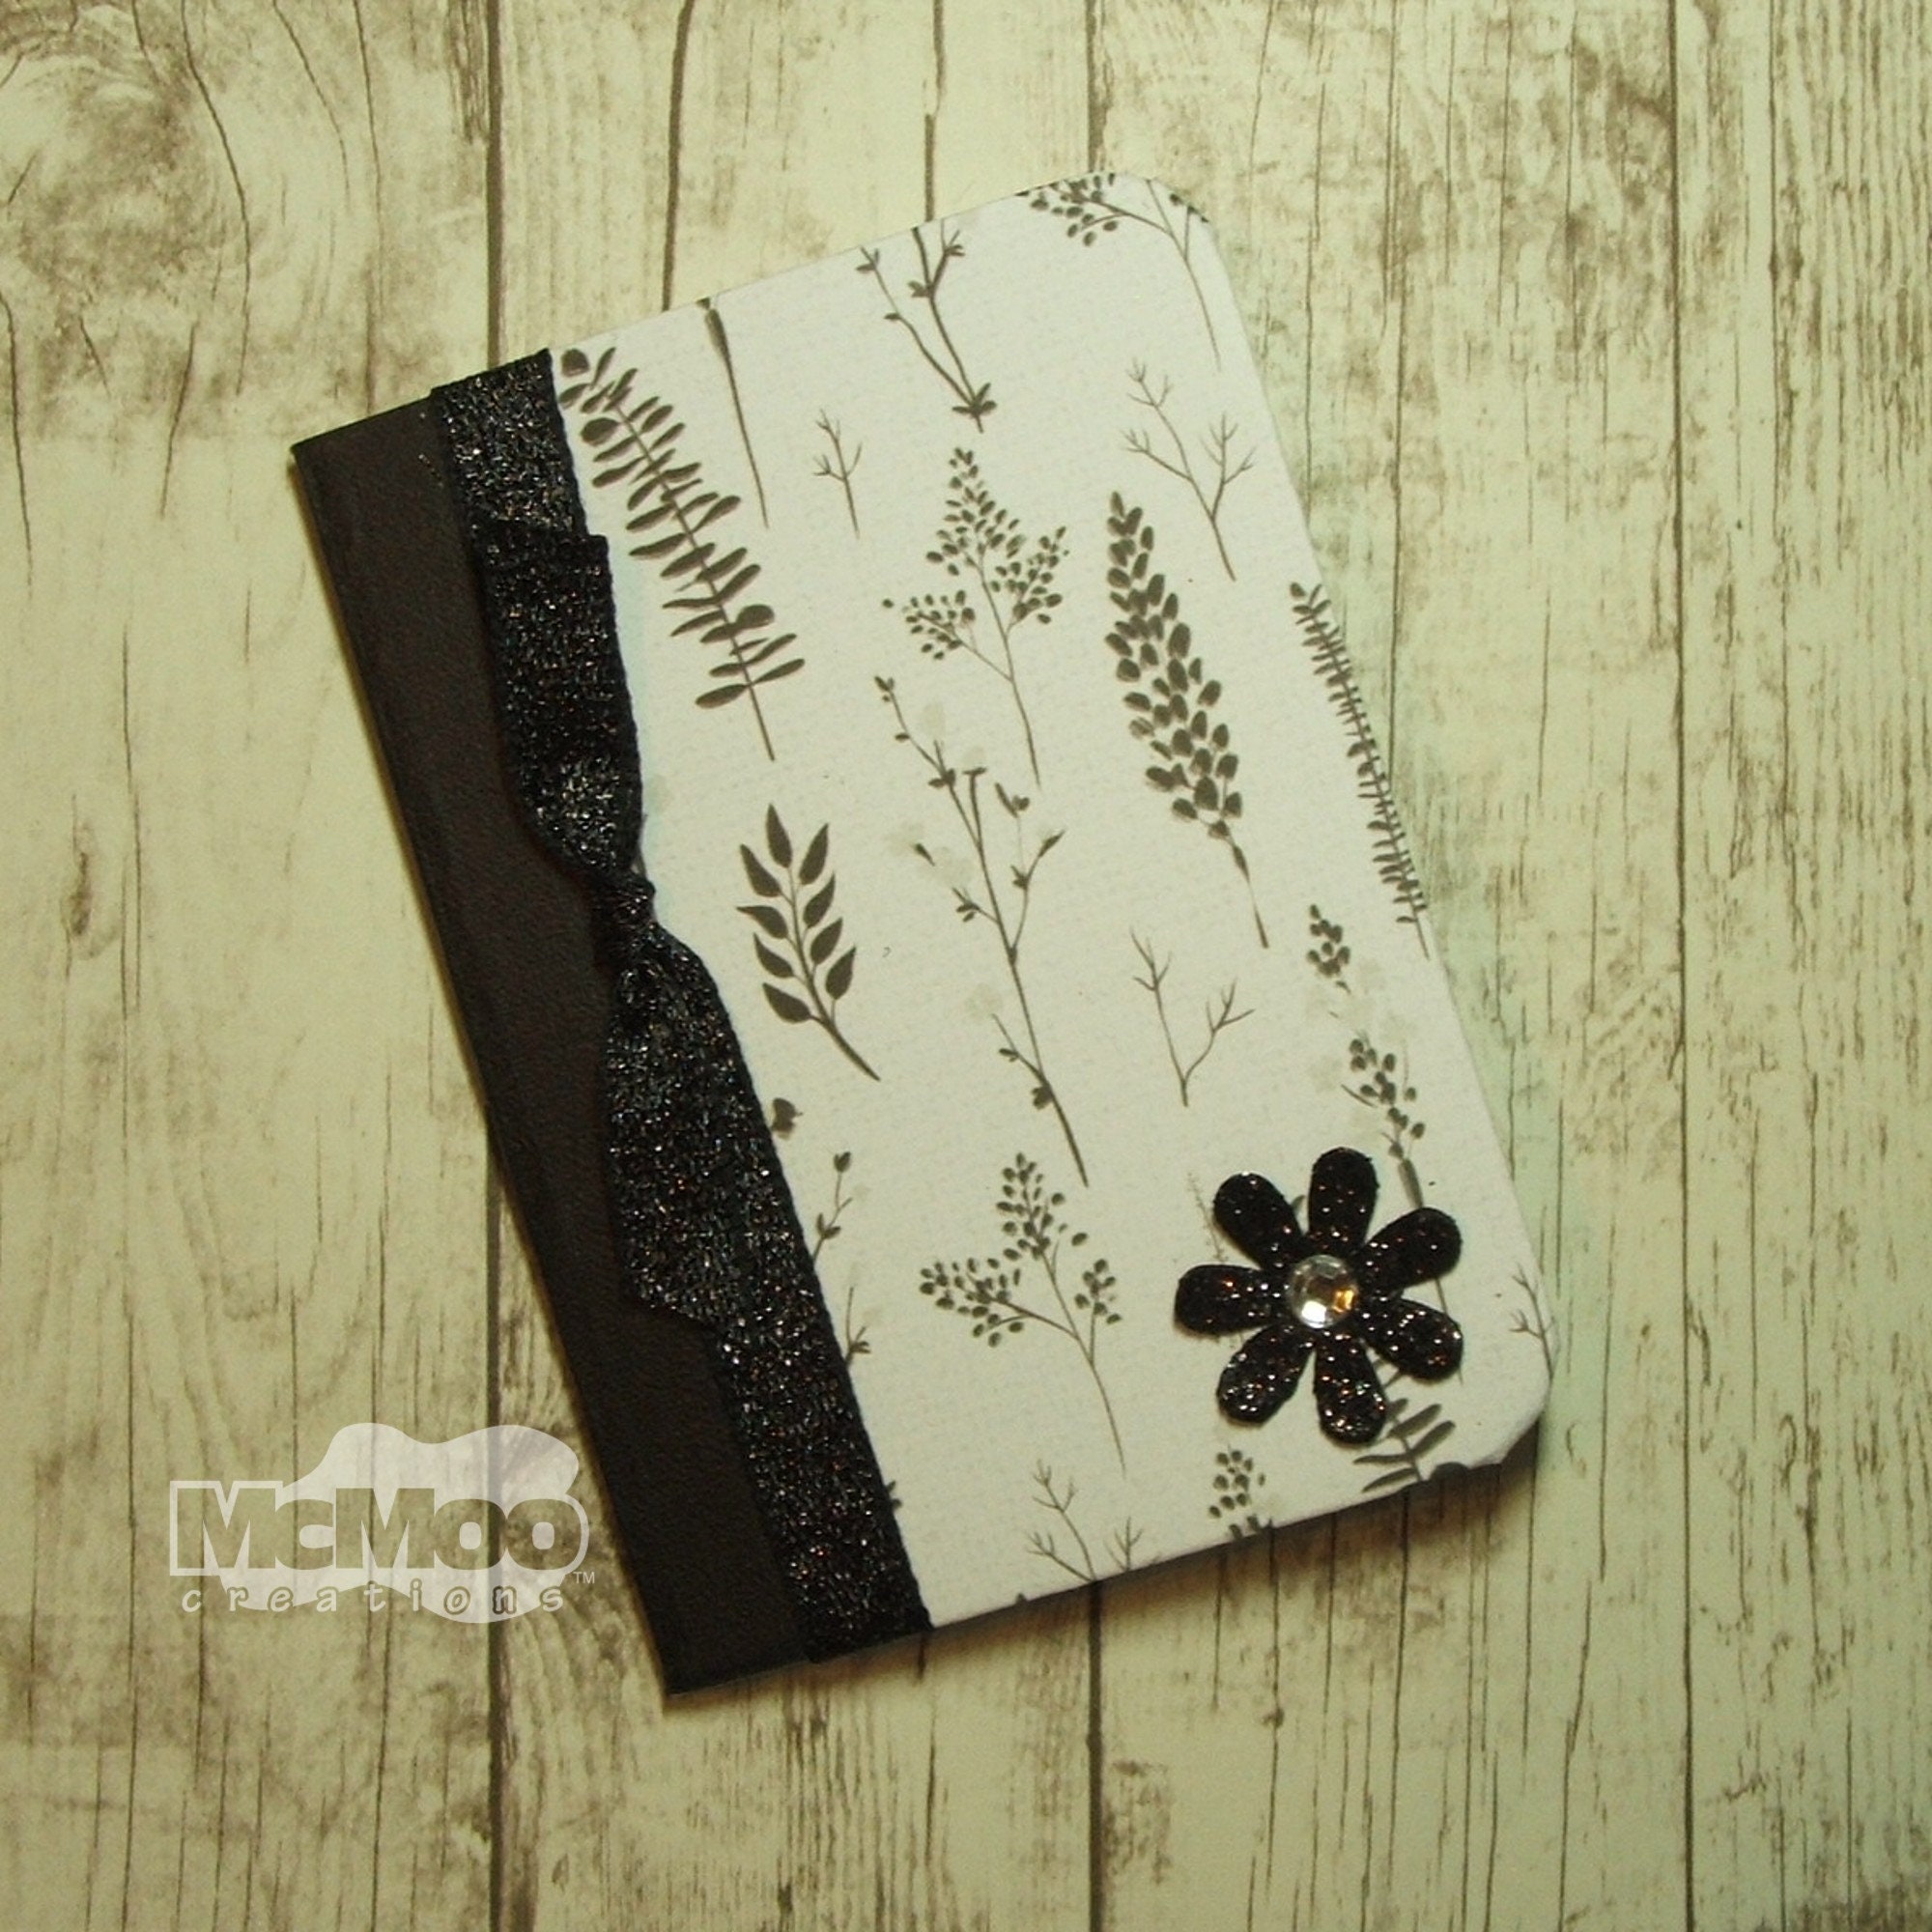 Small Black Paper Journal – Blank Pages –